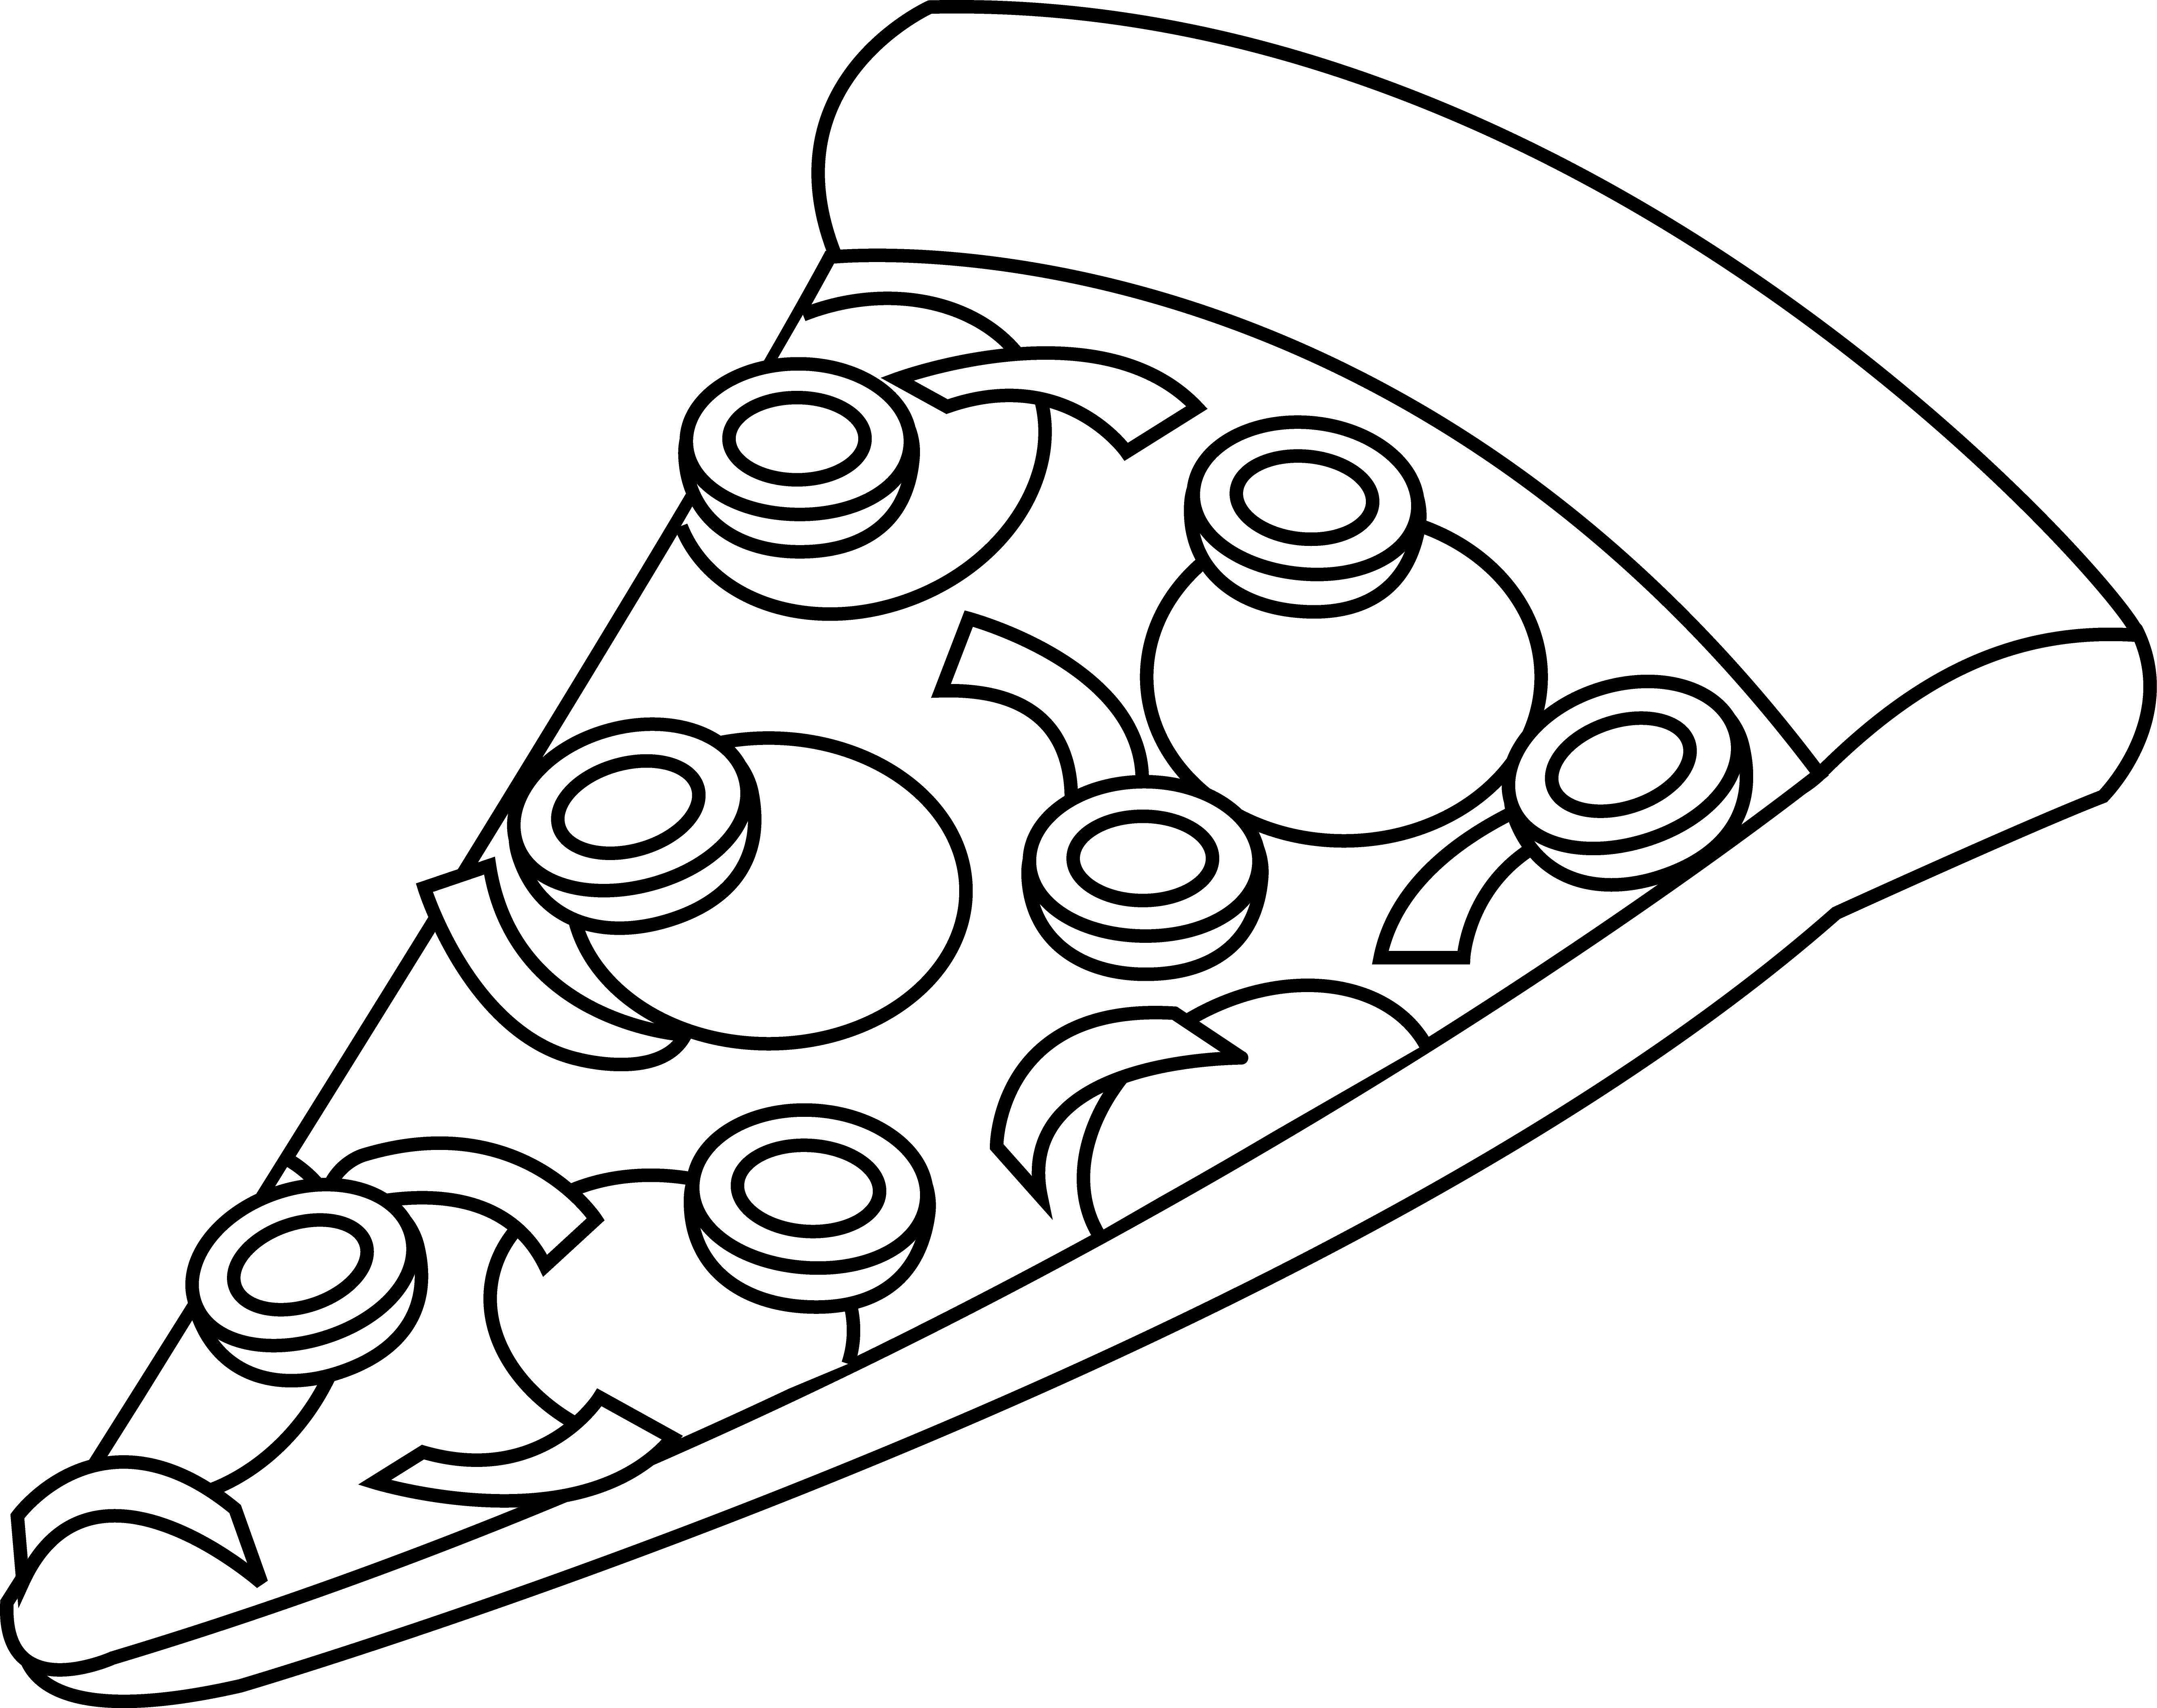 Line Art of a Slice of Pizza - Free Clip Art